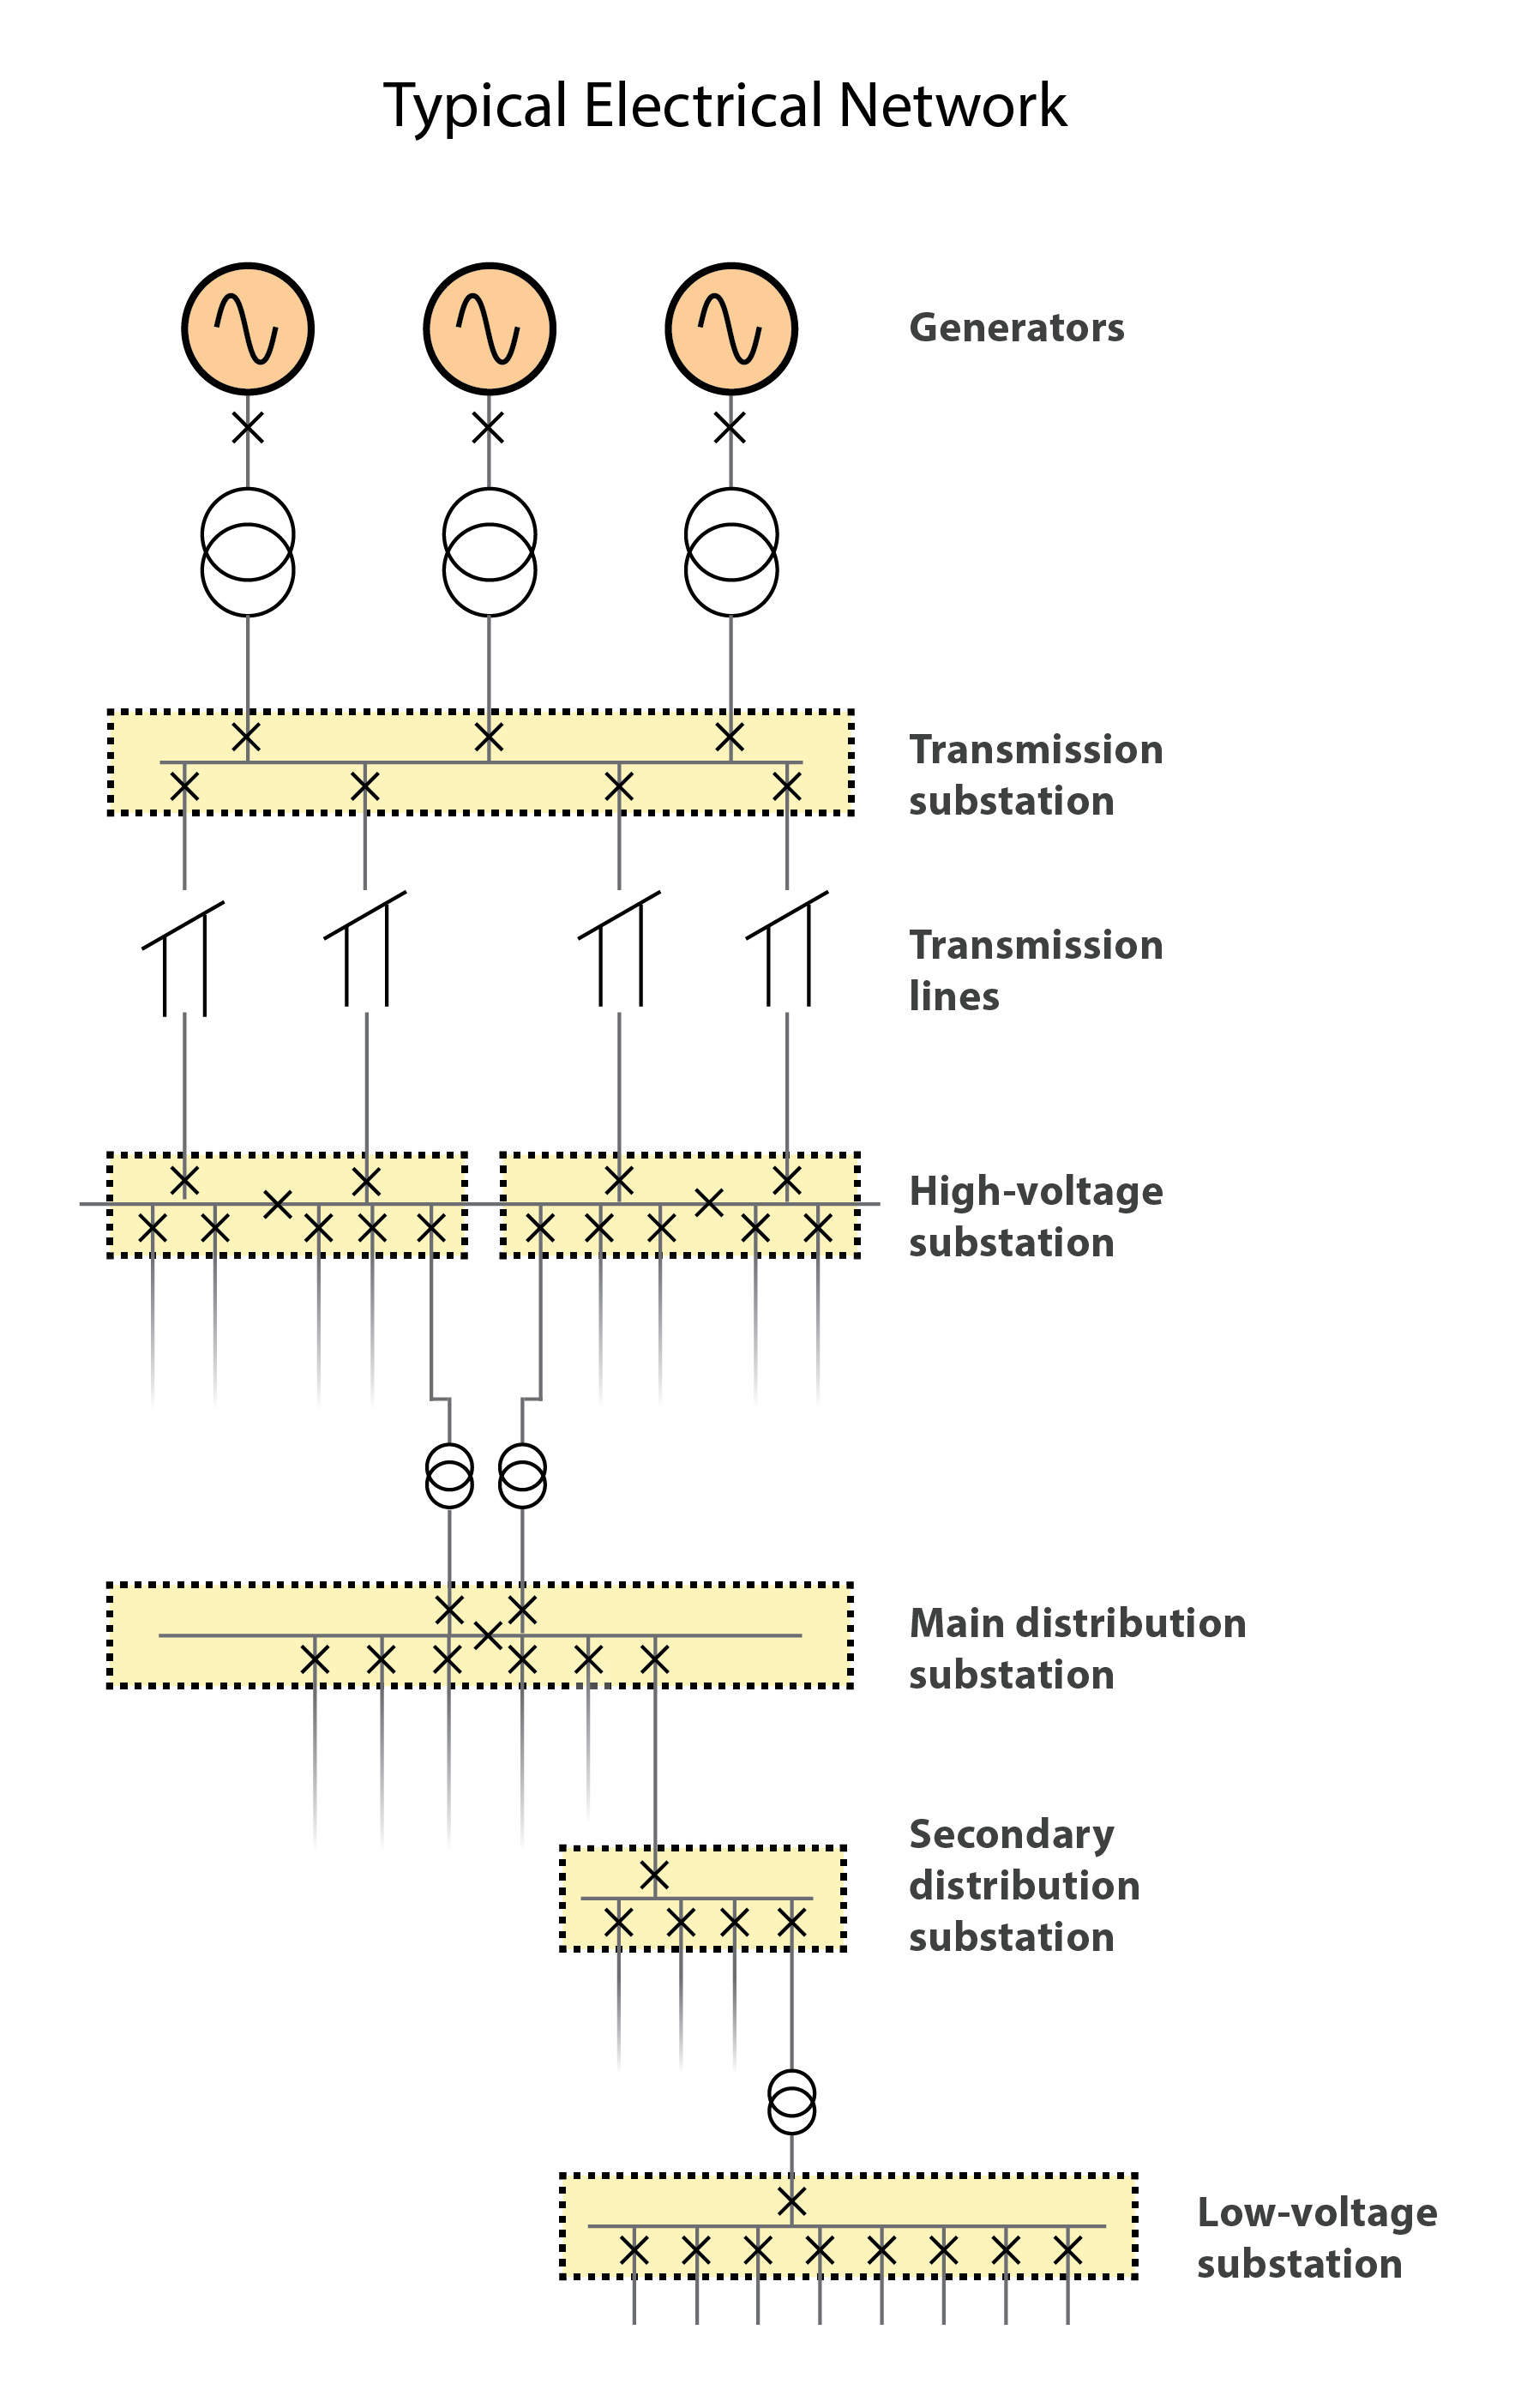 Typical Electrical network